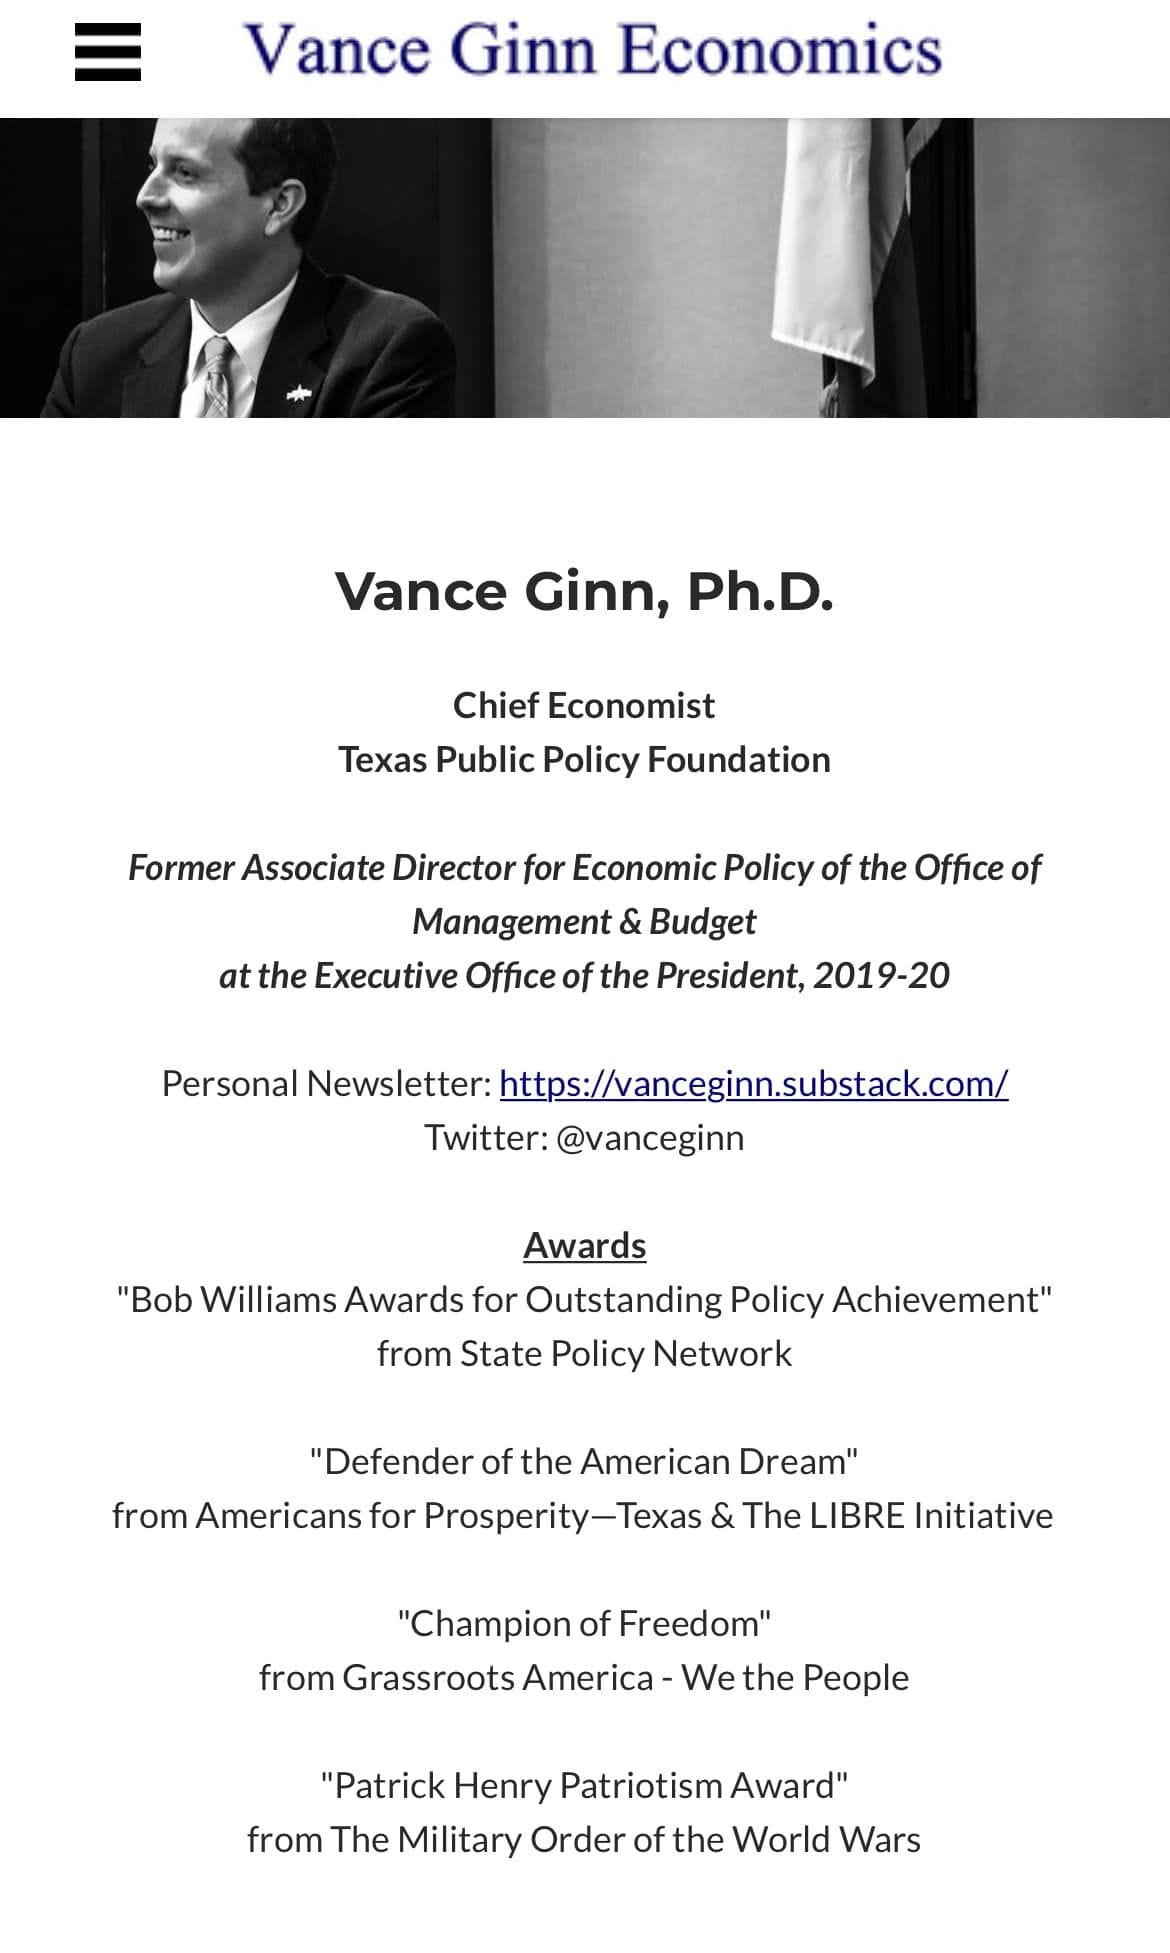 May be an image of 1 person and text that says 'Vance Ginn Economics Vance Ginn, Ph.D. Chief Economist Texas Public Policy Foundation Former Associate Director for Economic Policy of the Office of Management Budget at the Executive Office of the President, 2019-20 Personal Newsletter: https://anceginn.substack.com/ Twitter: @vanceginn Awards "Bob Williams Awards for Outstanding Policy Achievement" from State Policy Network "Defender of the American Dream" from Americans for Prosperity-Texas The LIBRE Initiative "Champion of Freedom" from Grassroots America We the People "Patrick Henry Patriotism Award" from The Military Order of the World Wars'